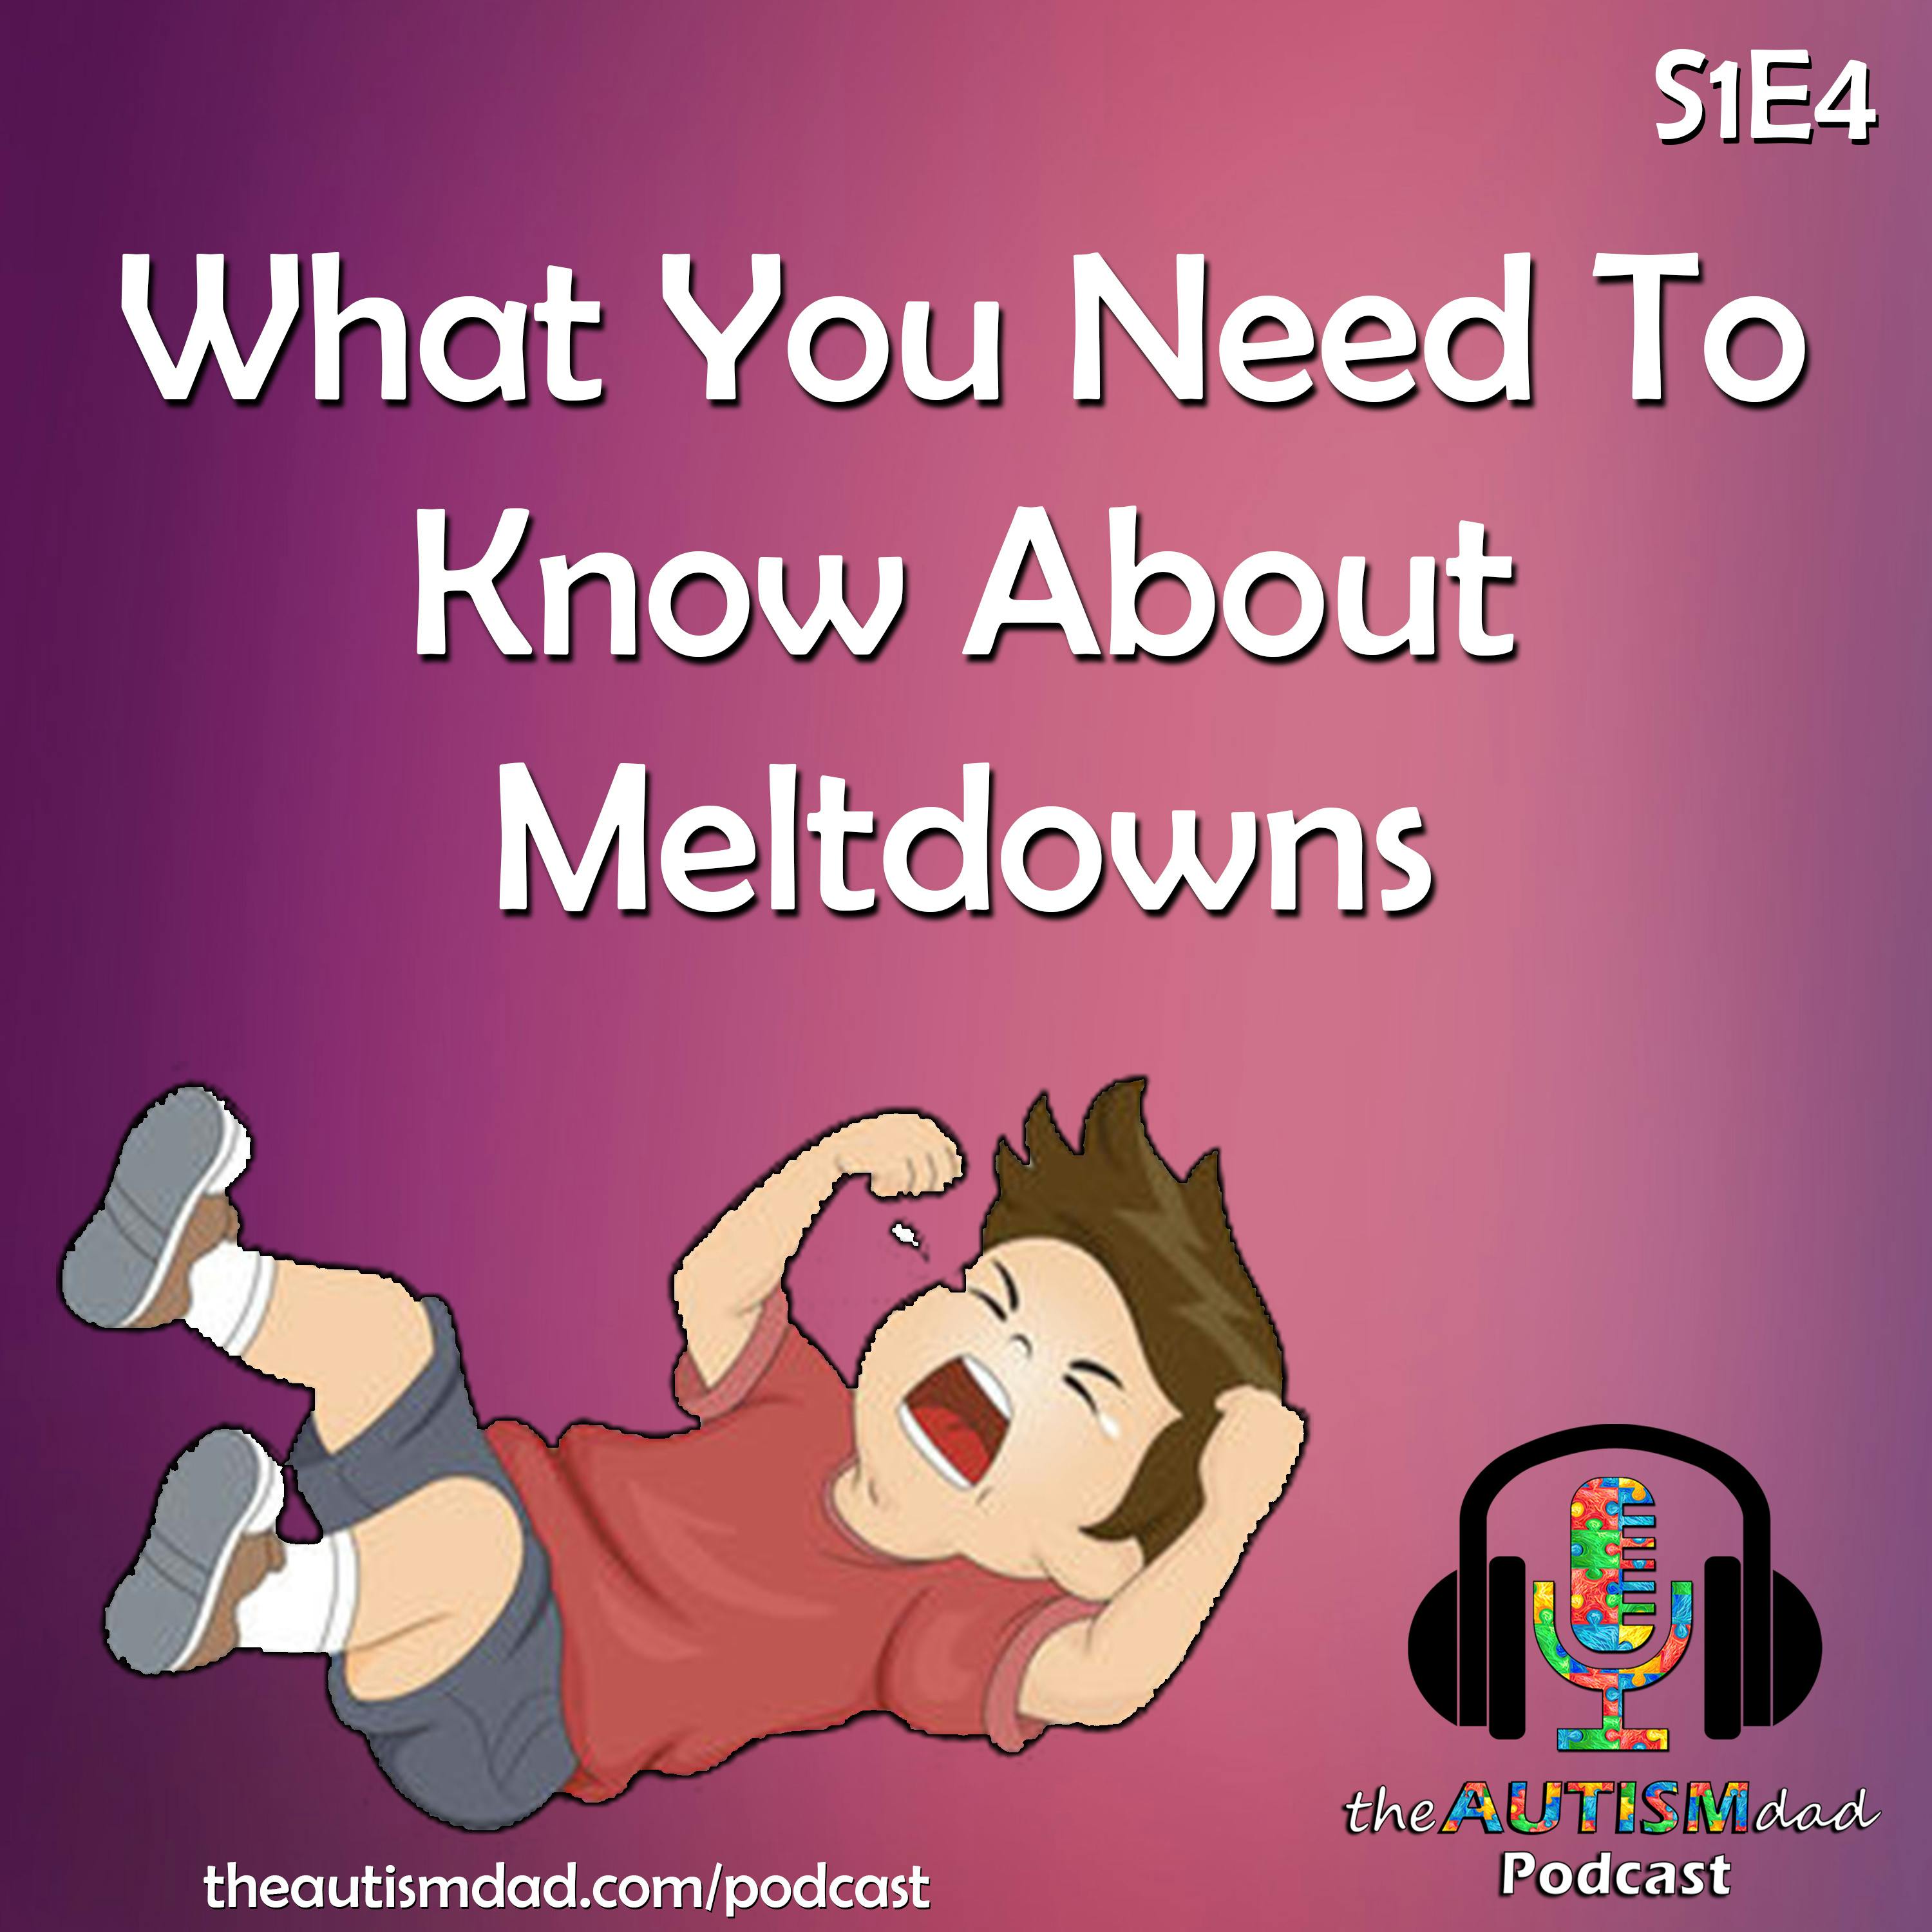 What You Need To Know About Meltdowns